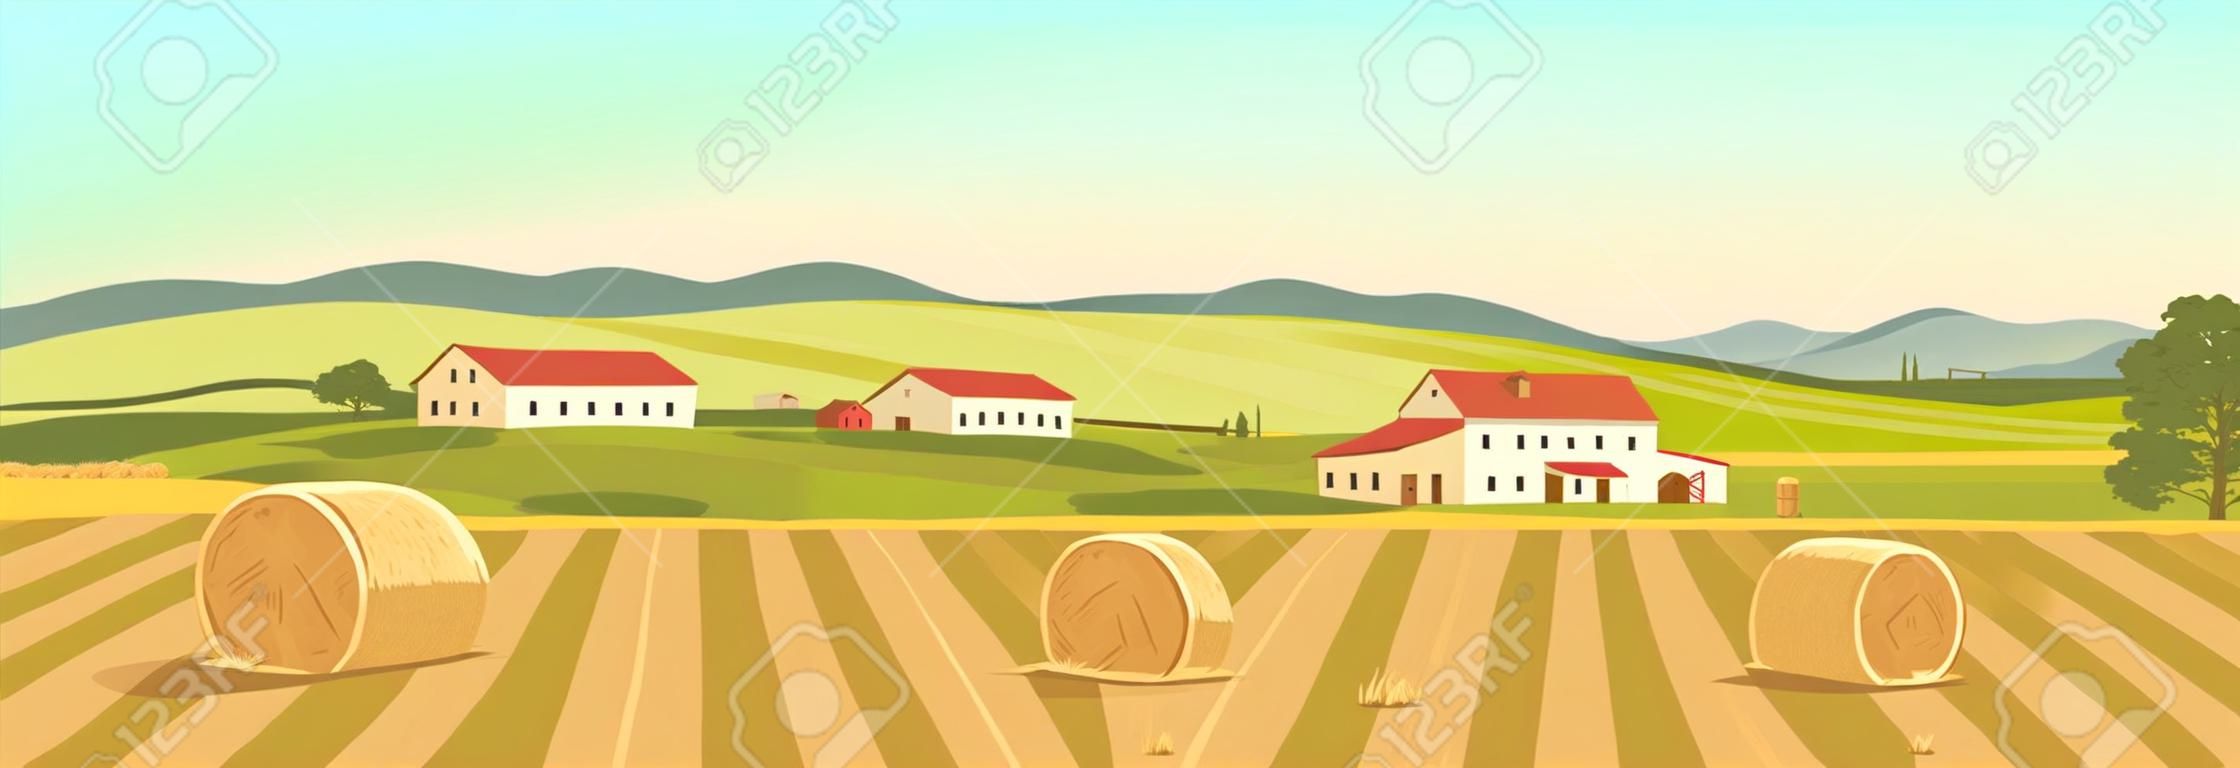 Farm in countryside flat color vector illustration. Farmland 2D cartoon landscape with mountains on background. Bales of hay on yellow agricultural field. Stacks of wheat in rural area